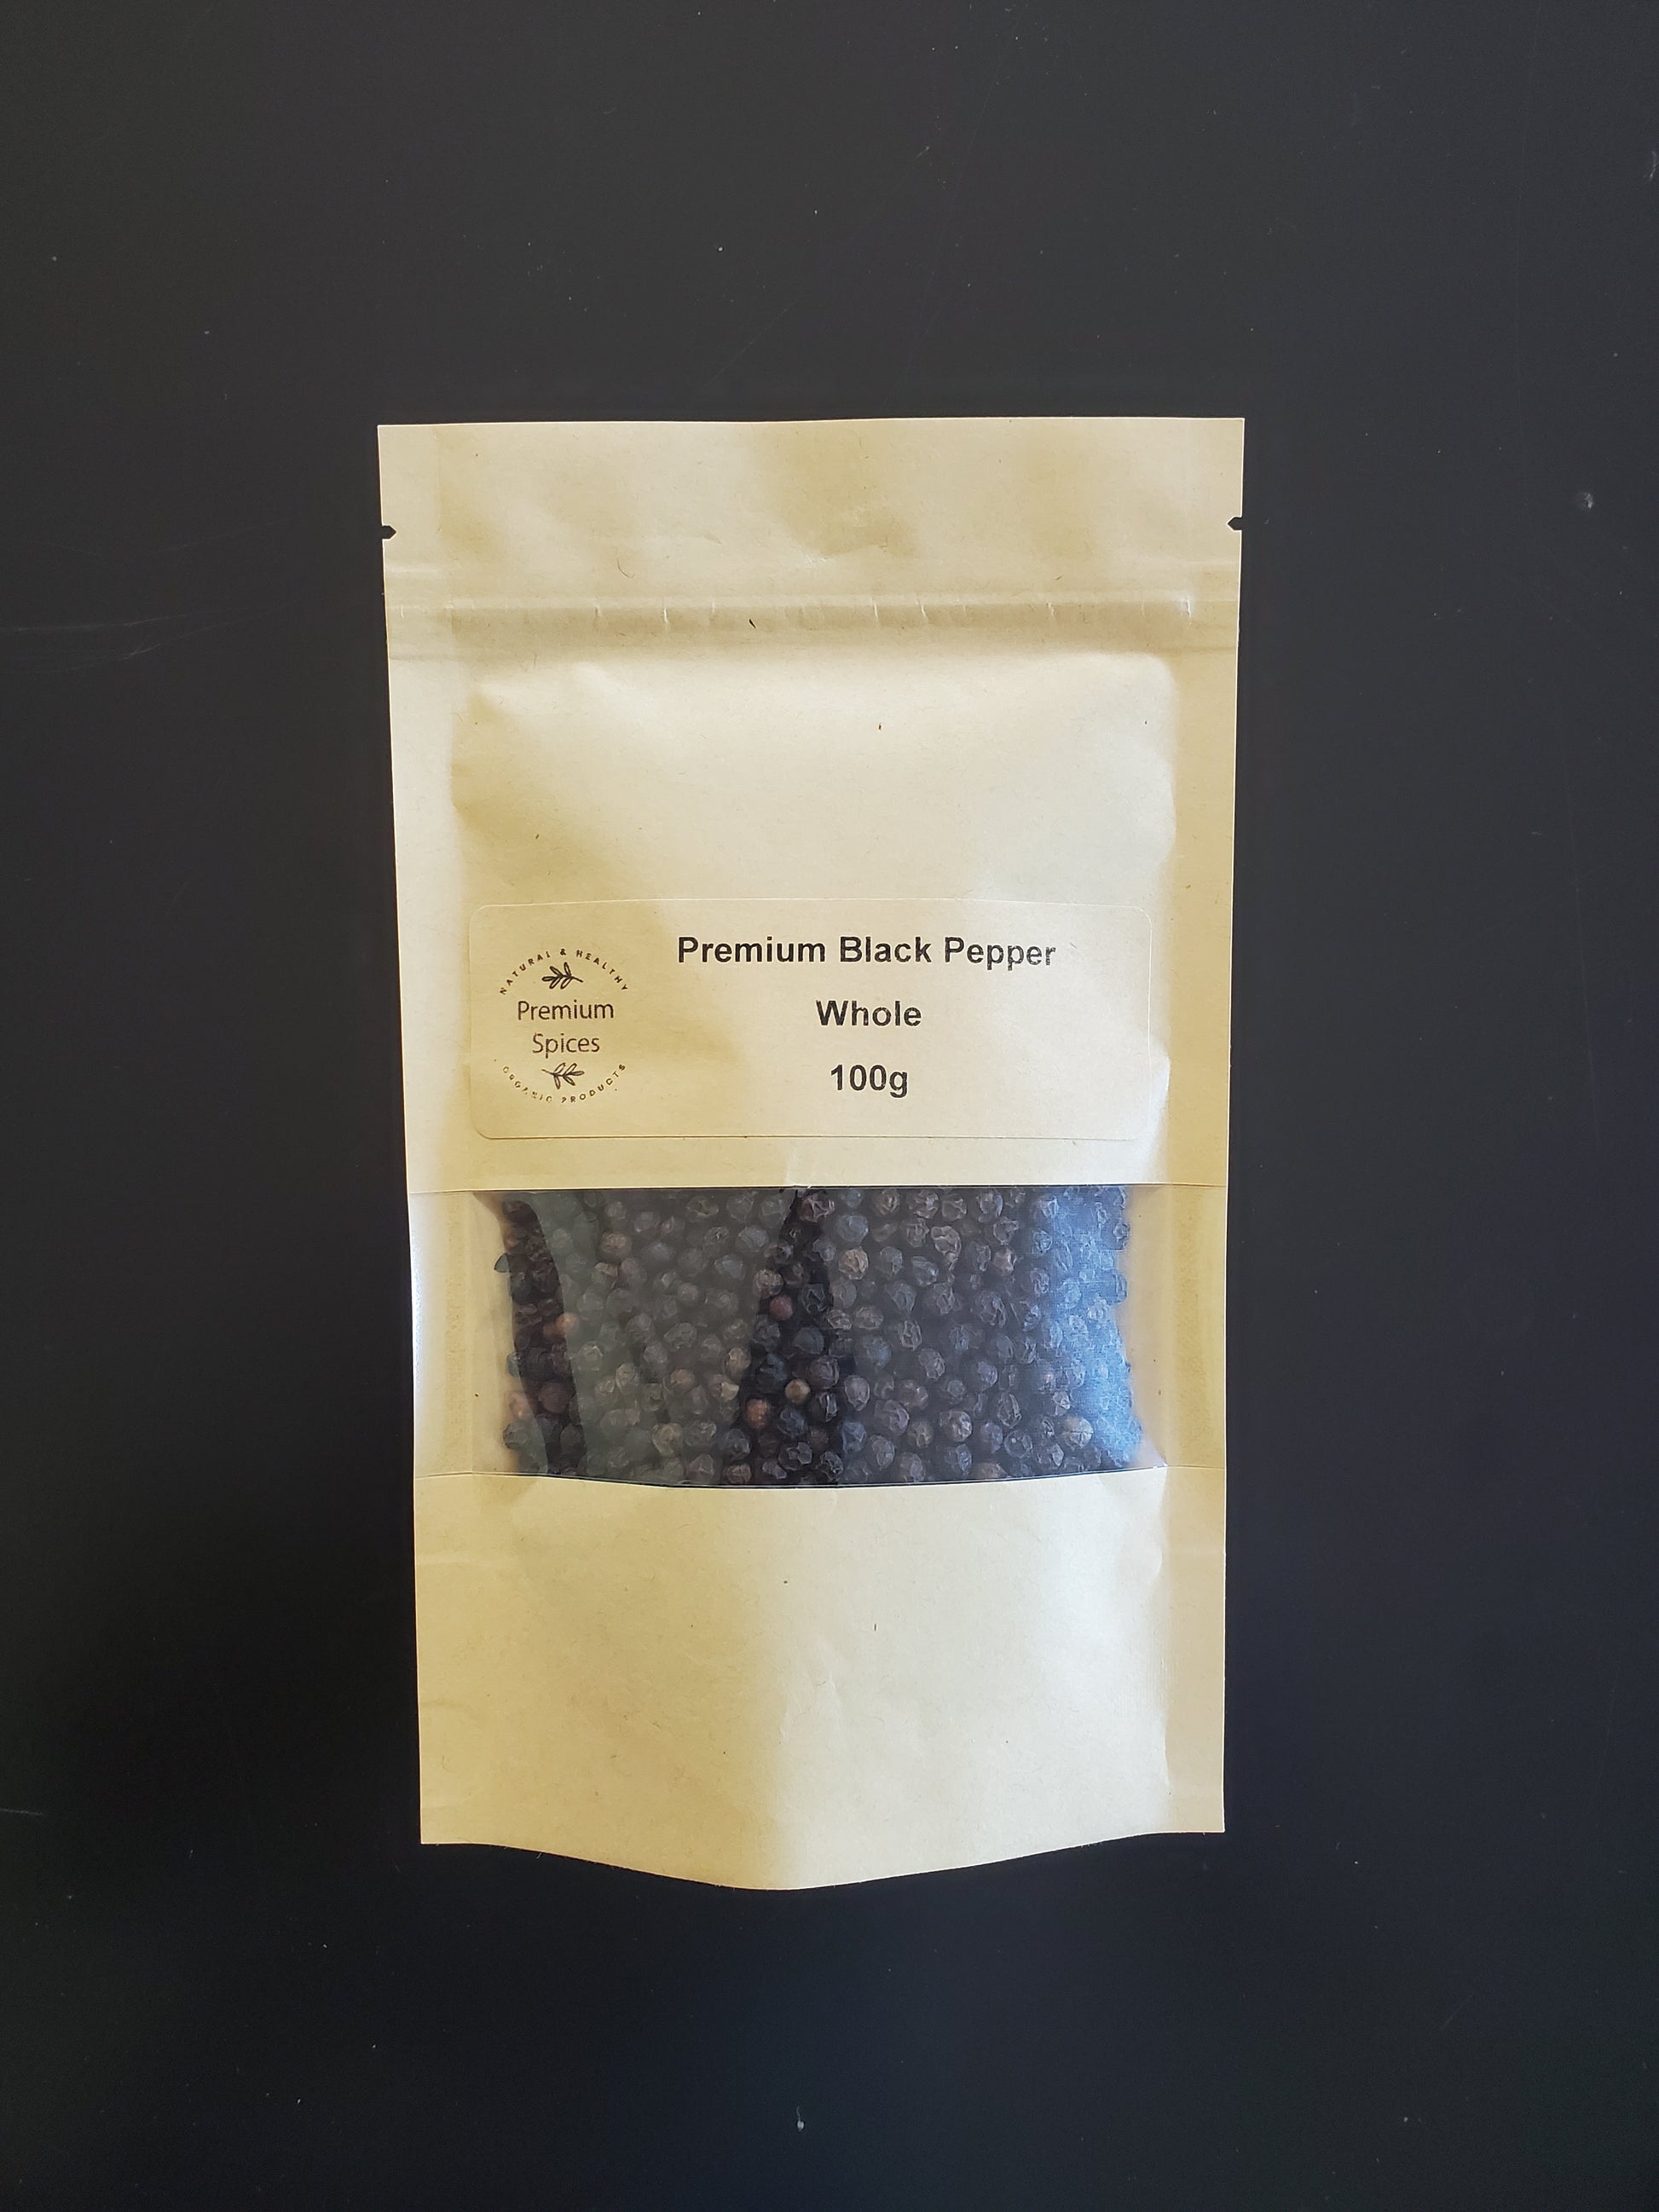 Whole Black pepper NZ| Pepper Spices | Peppercorn, showing the eco-frinedly 100g packaging